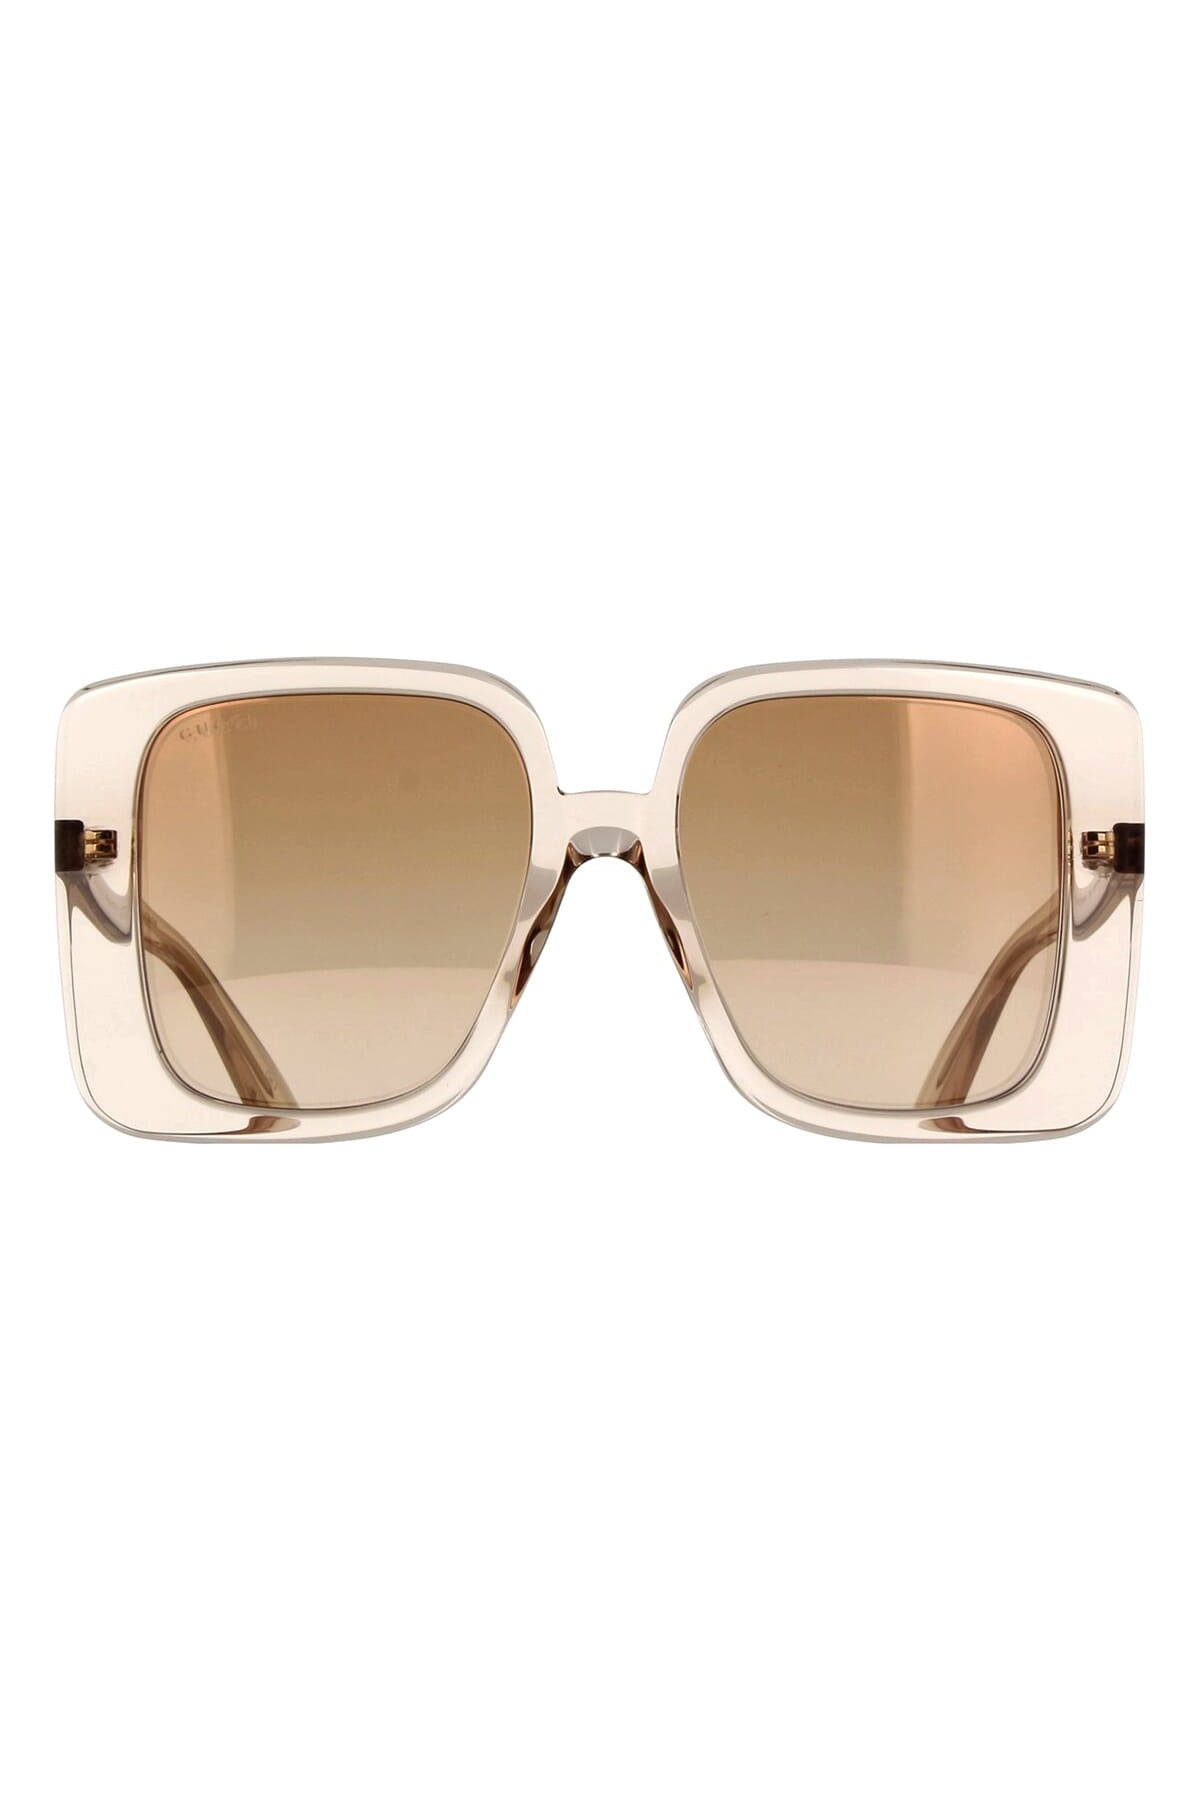 GUCCI-Oversized Rectangle Sunglasses-BEIGE/BROWN